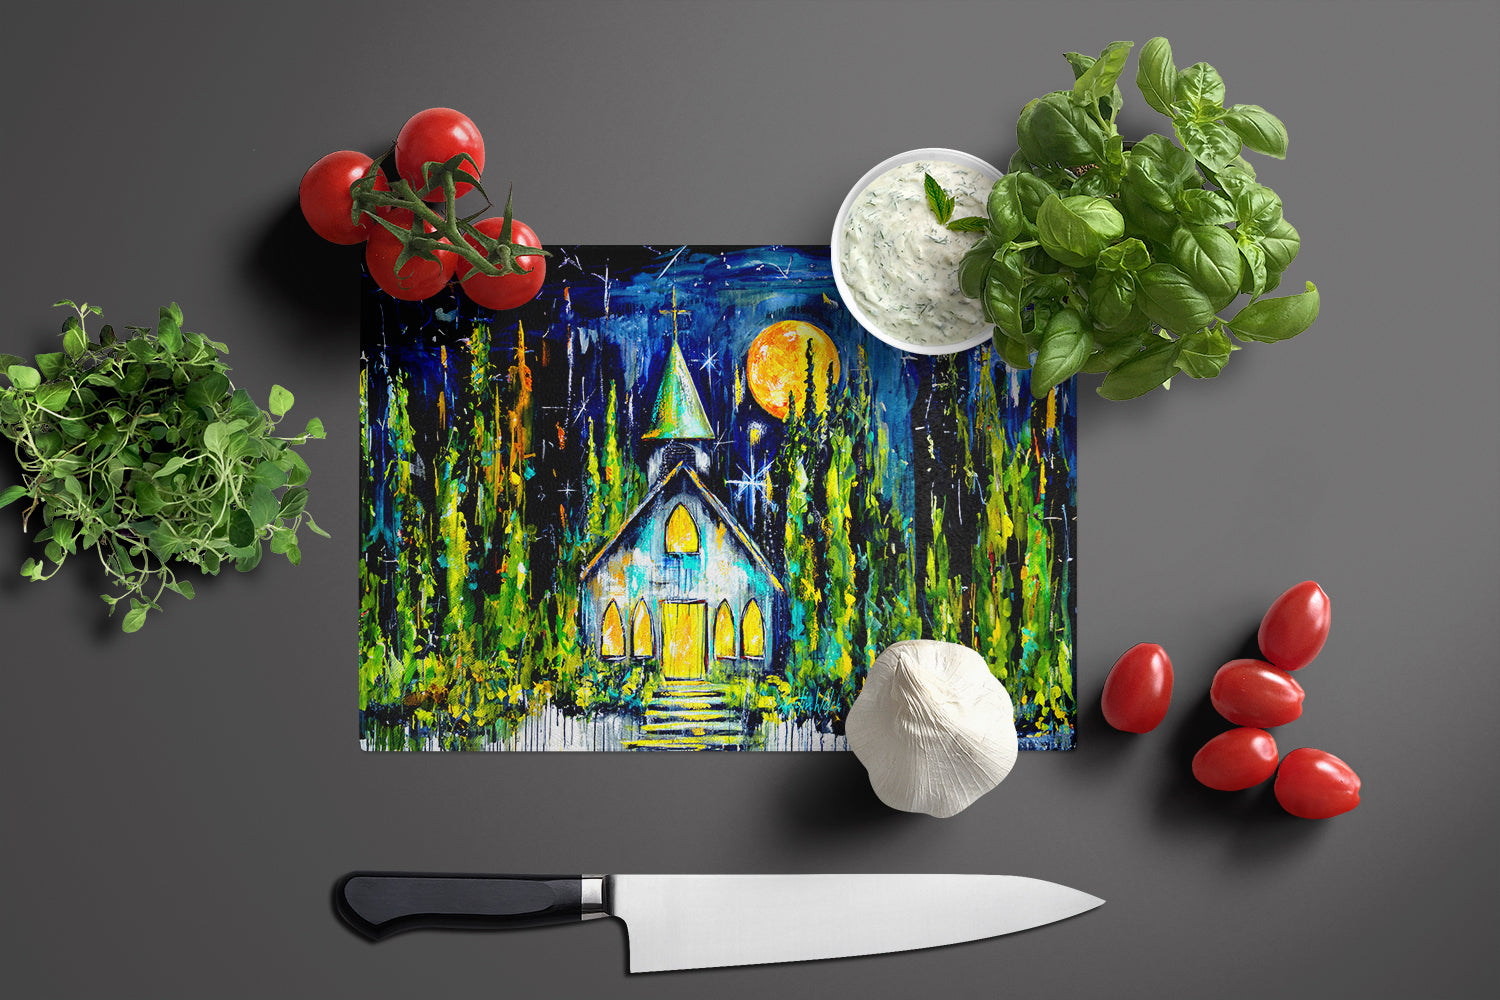 Rock of Ages Church Glass Cutting Board